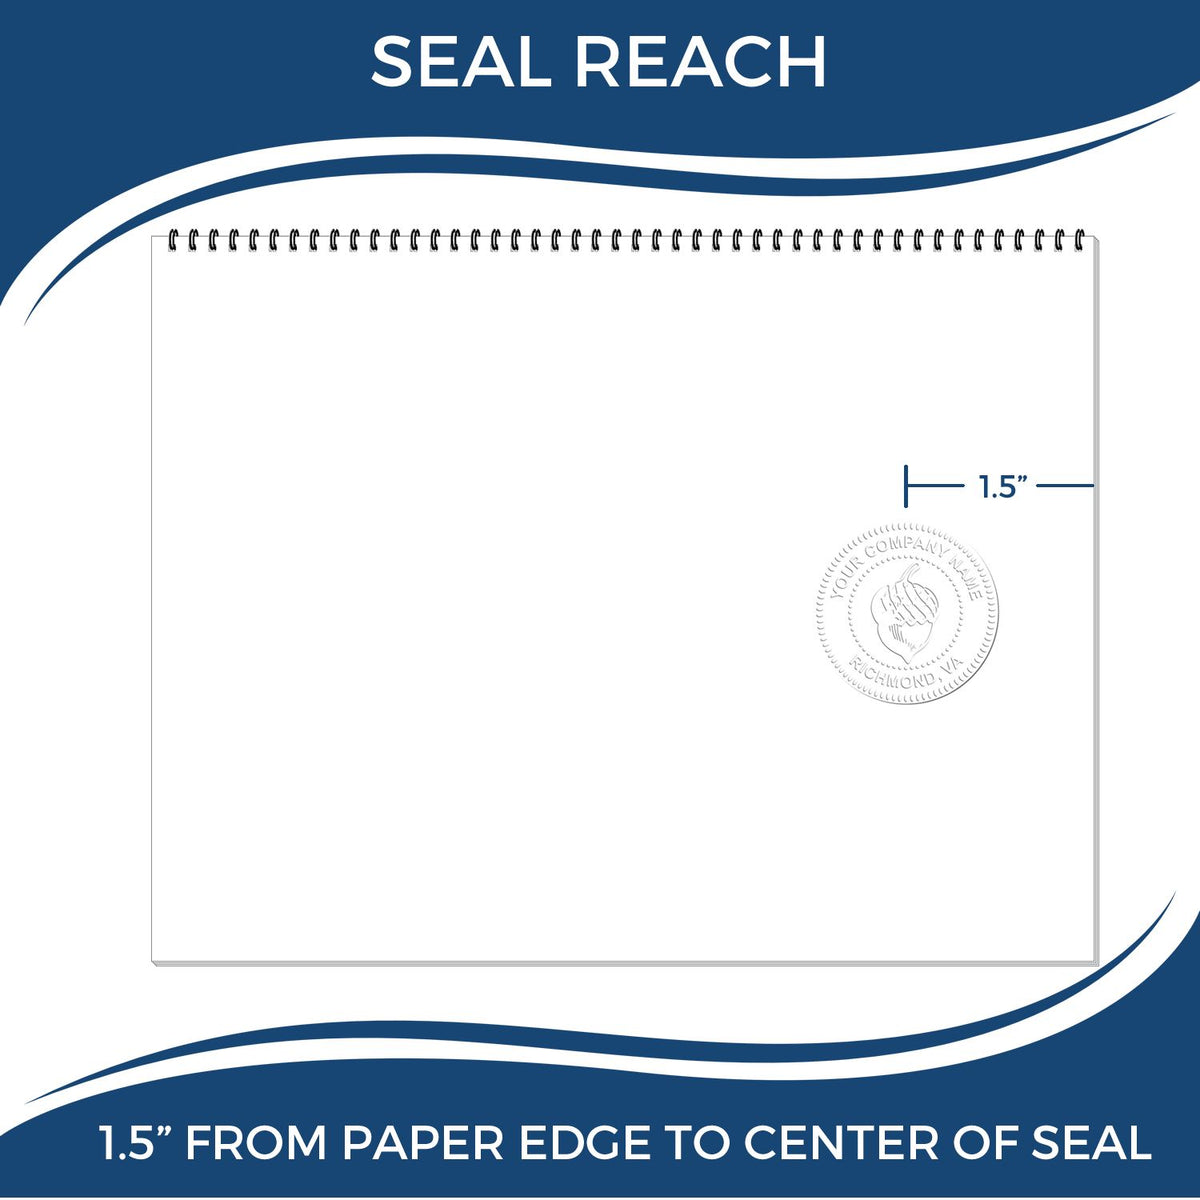 An infographic showing the seal reach which is represented by a ruler and a miniature seal image of the Gift South Carolina Engineer Seal